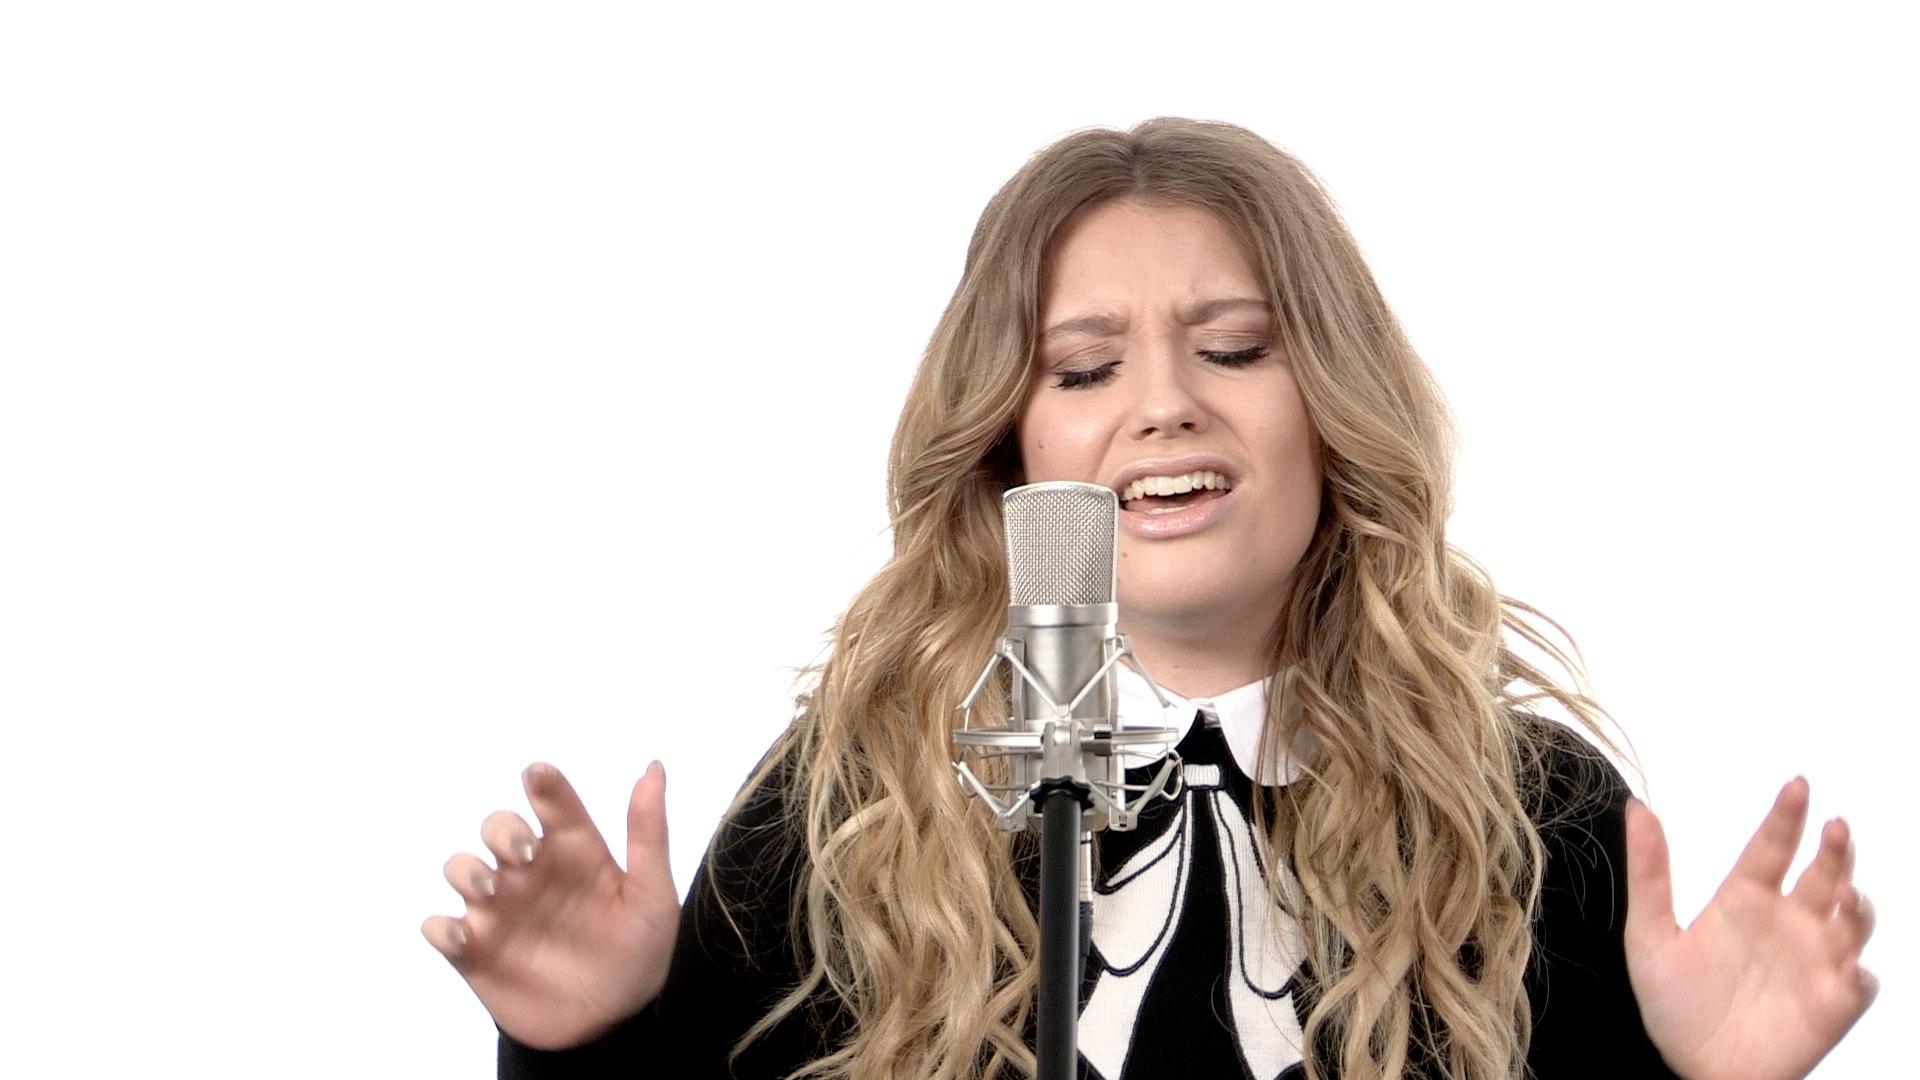 UK superstar Ella Henderson performs showstopping 'Ghost